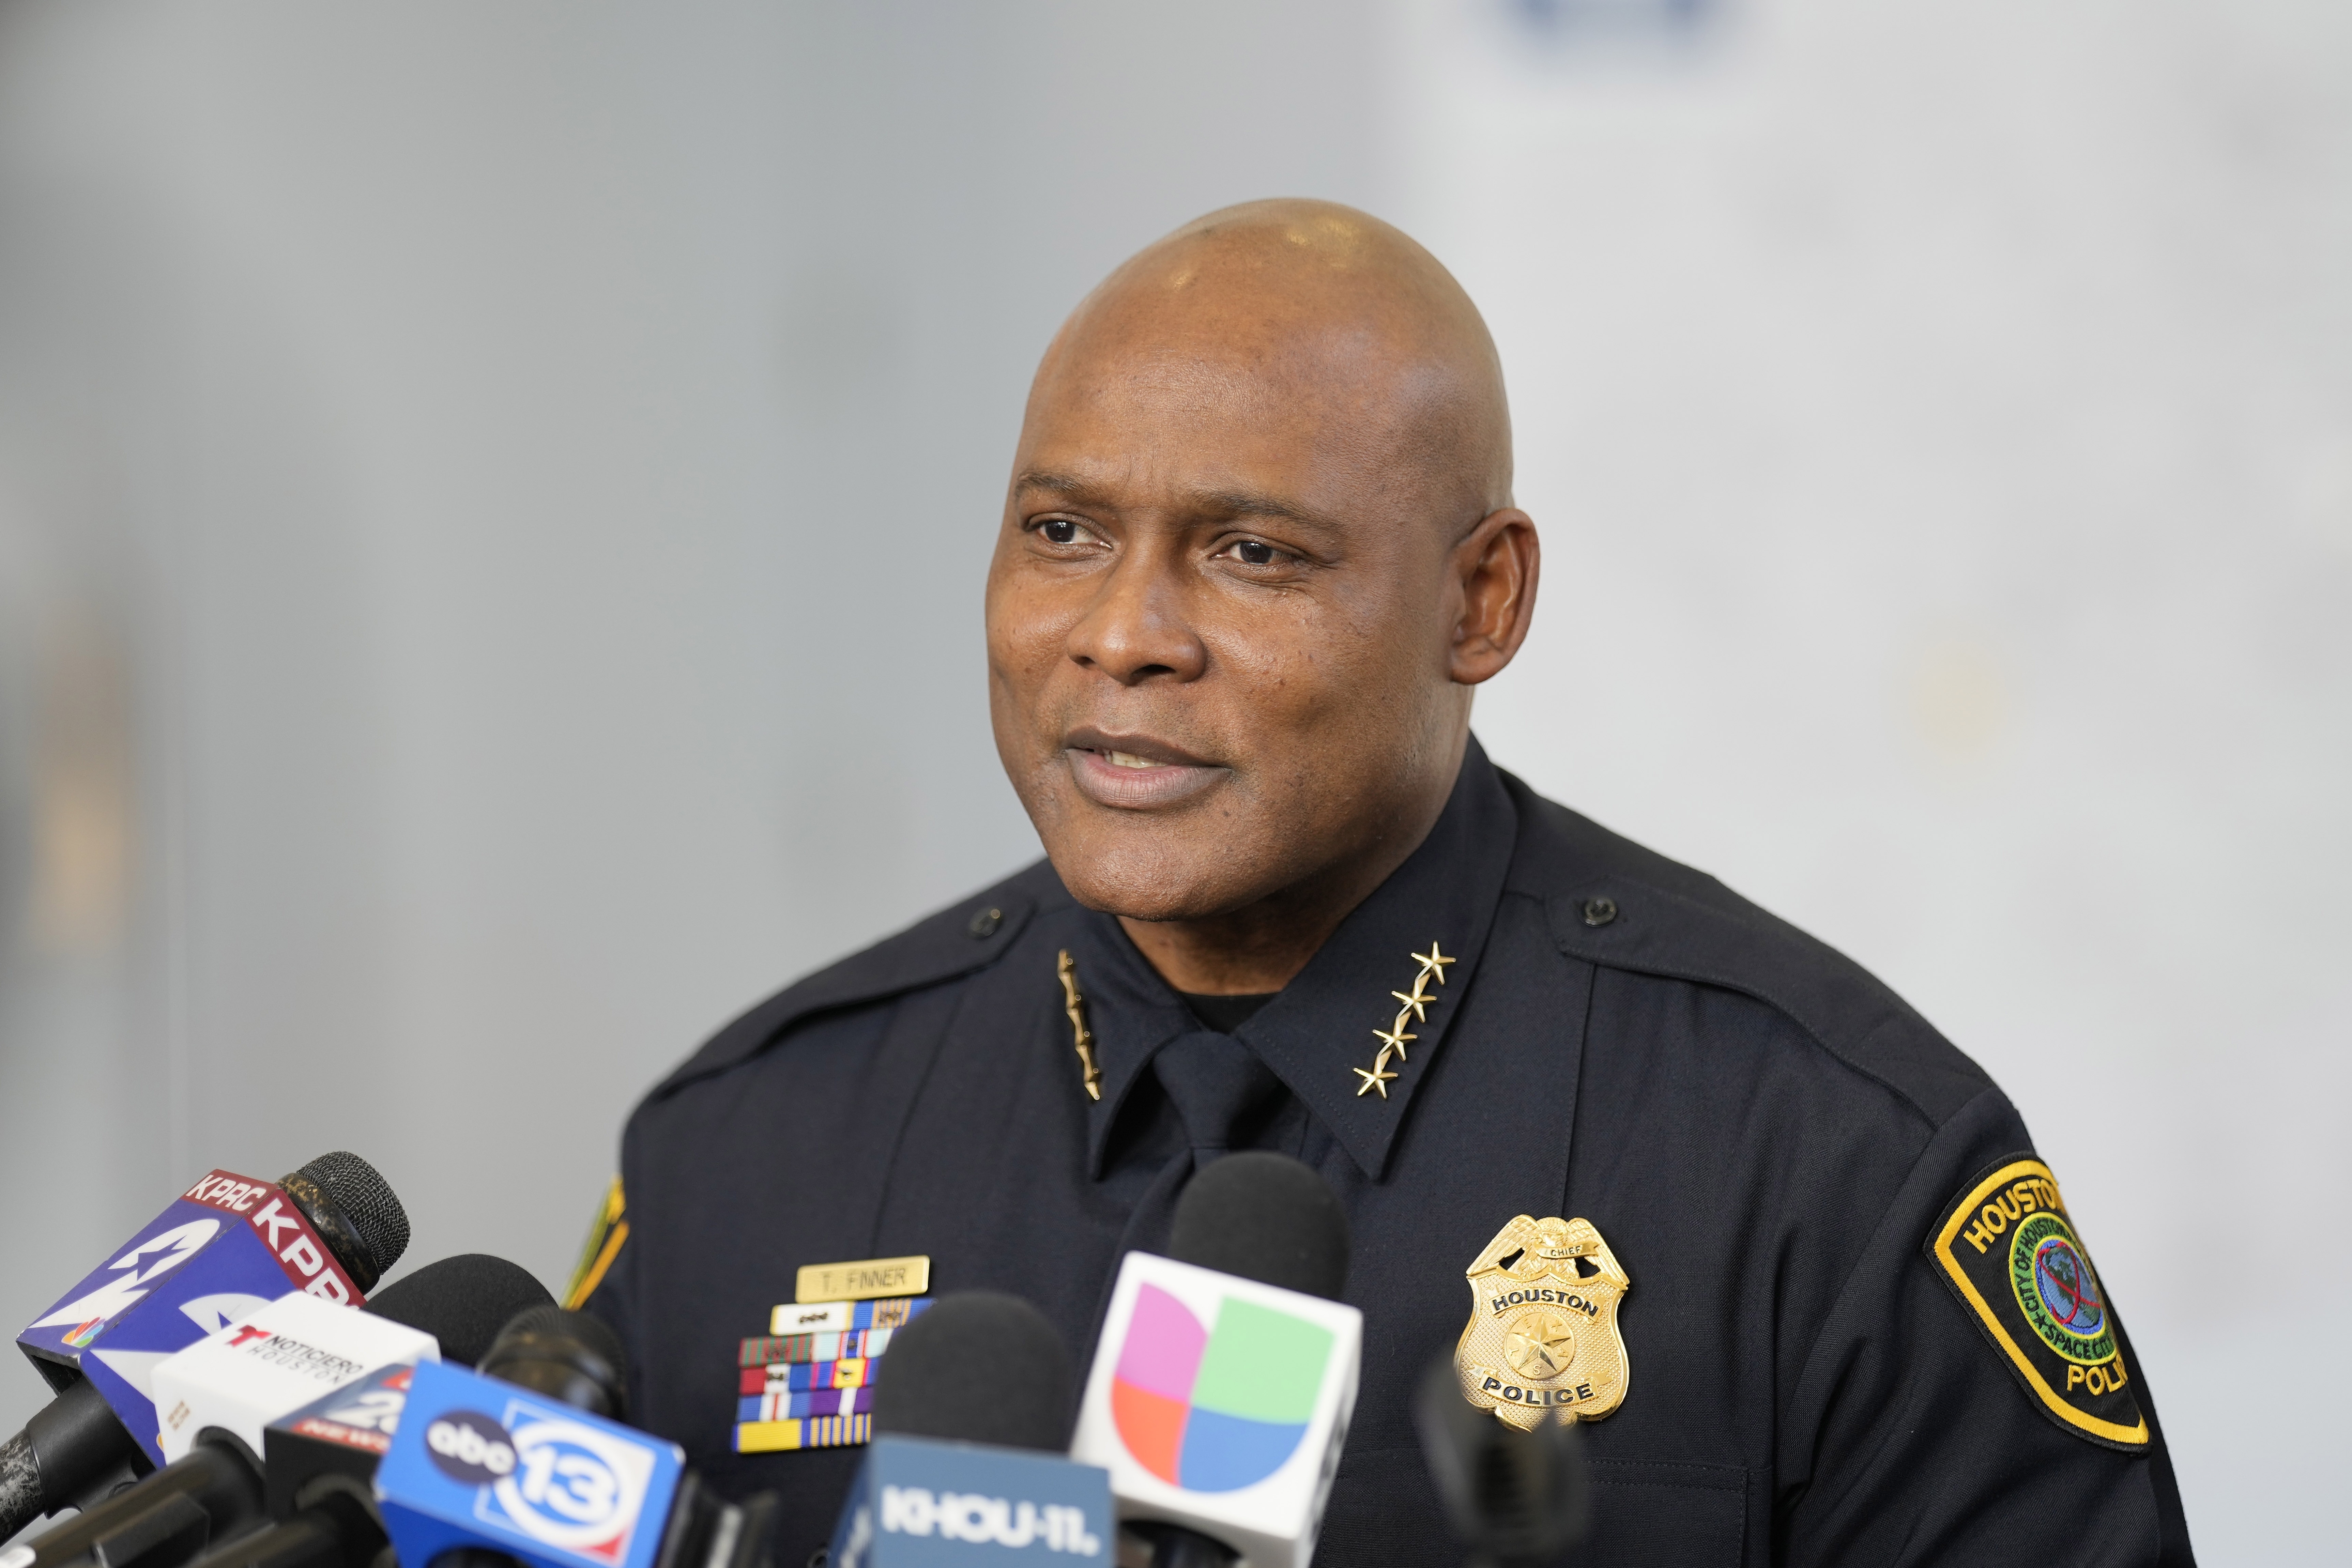 Houston Police Chief Troy Finner's retirement comes as police investigate the dropping of...